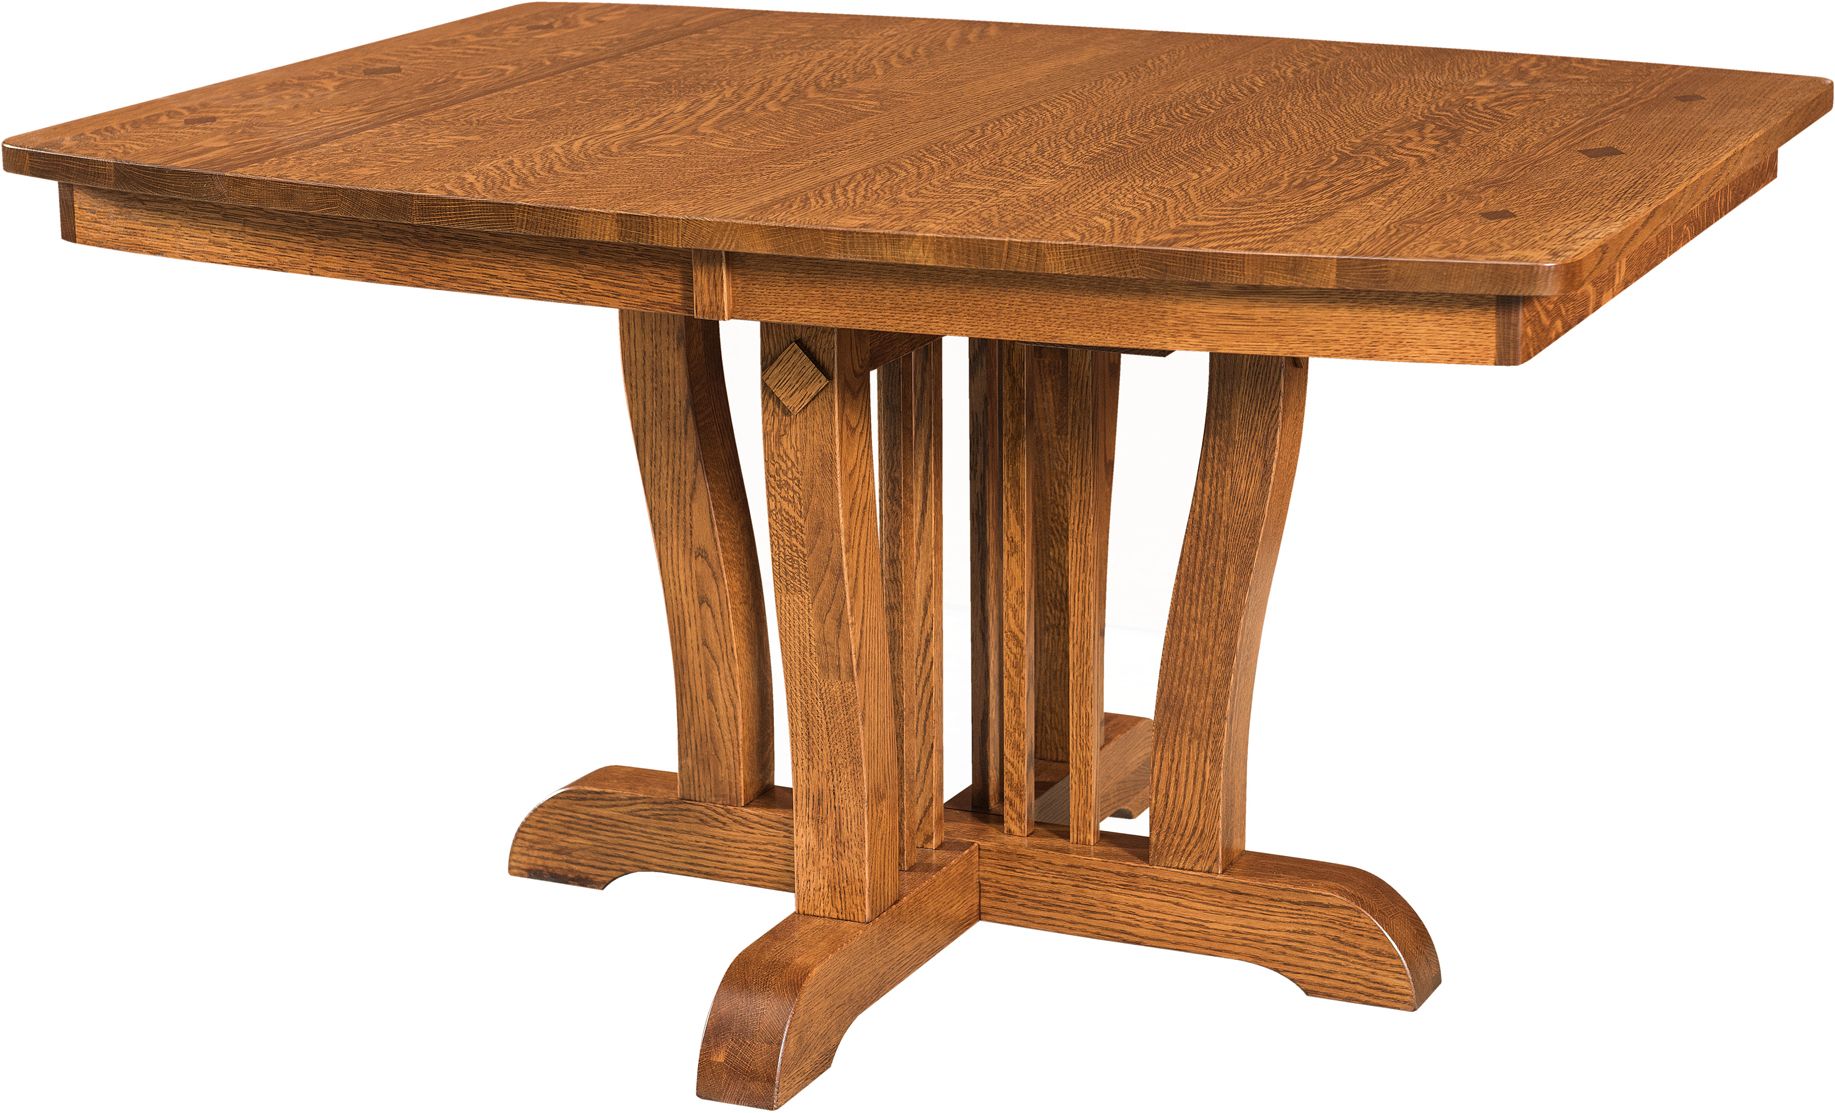 Amish Pedestal With Regard To Most Current Jazmin Pedestal Dining Tables (View 10 of 20)